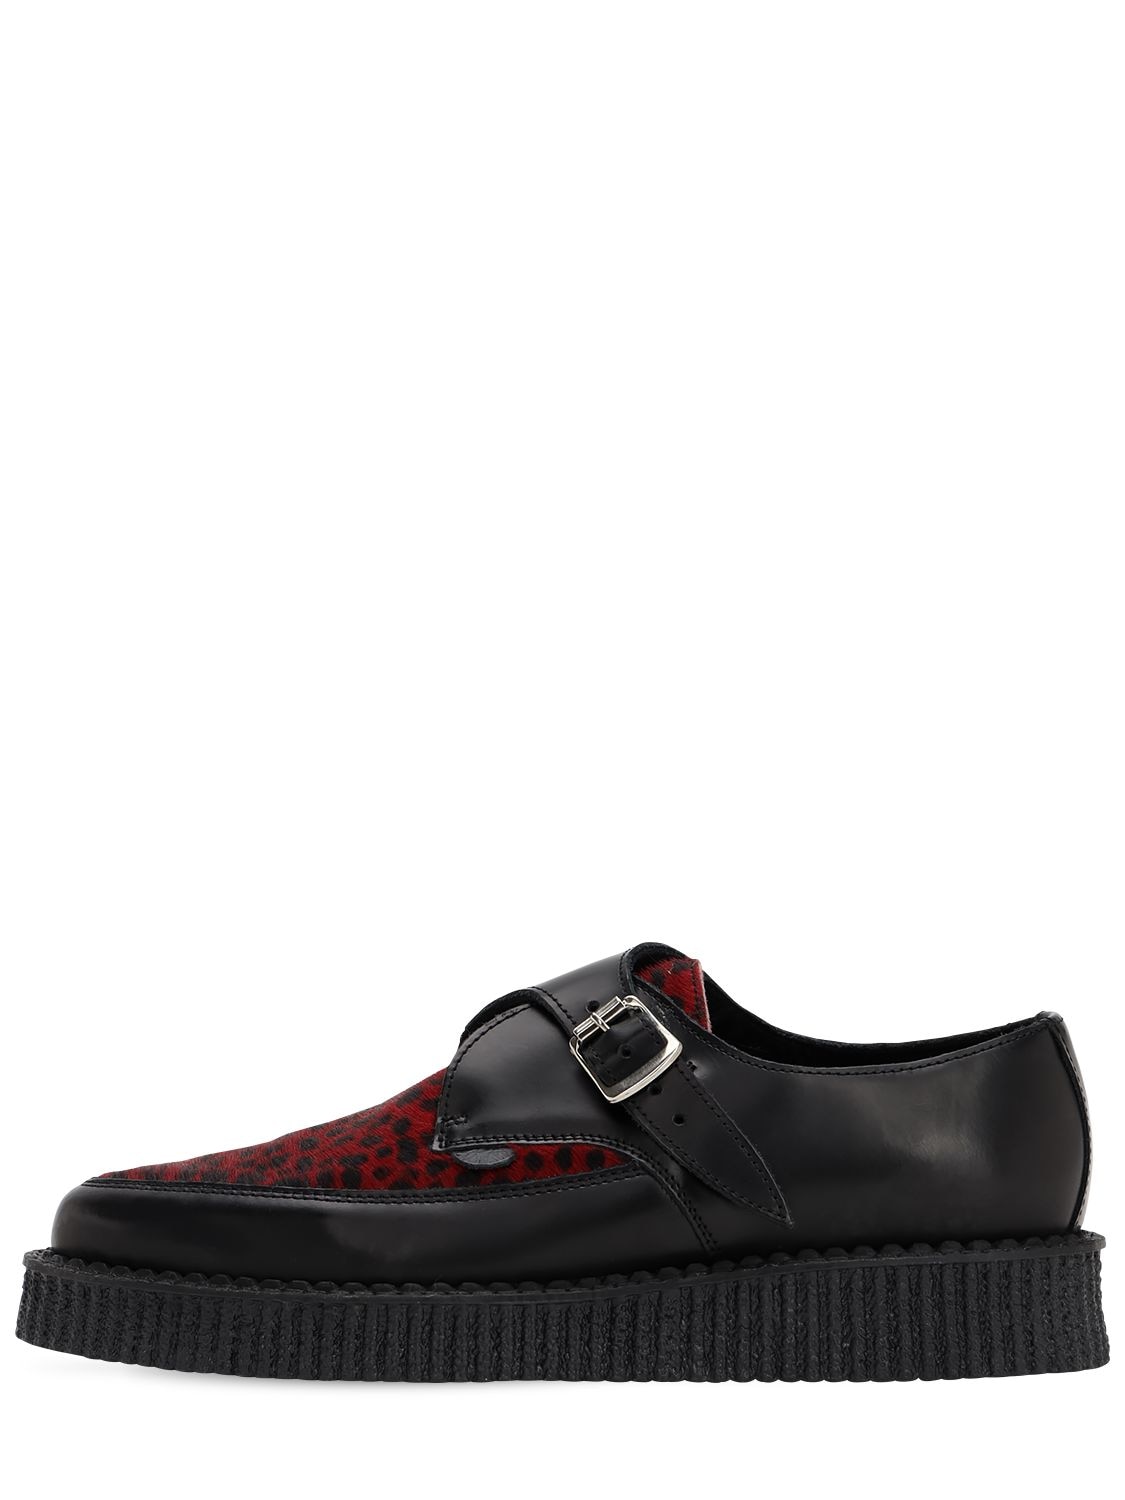 Underground 30mm Buckled Leather Loafers W/ Ponyskin In Black,red